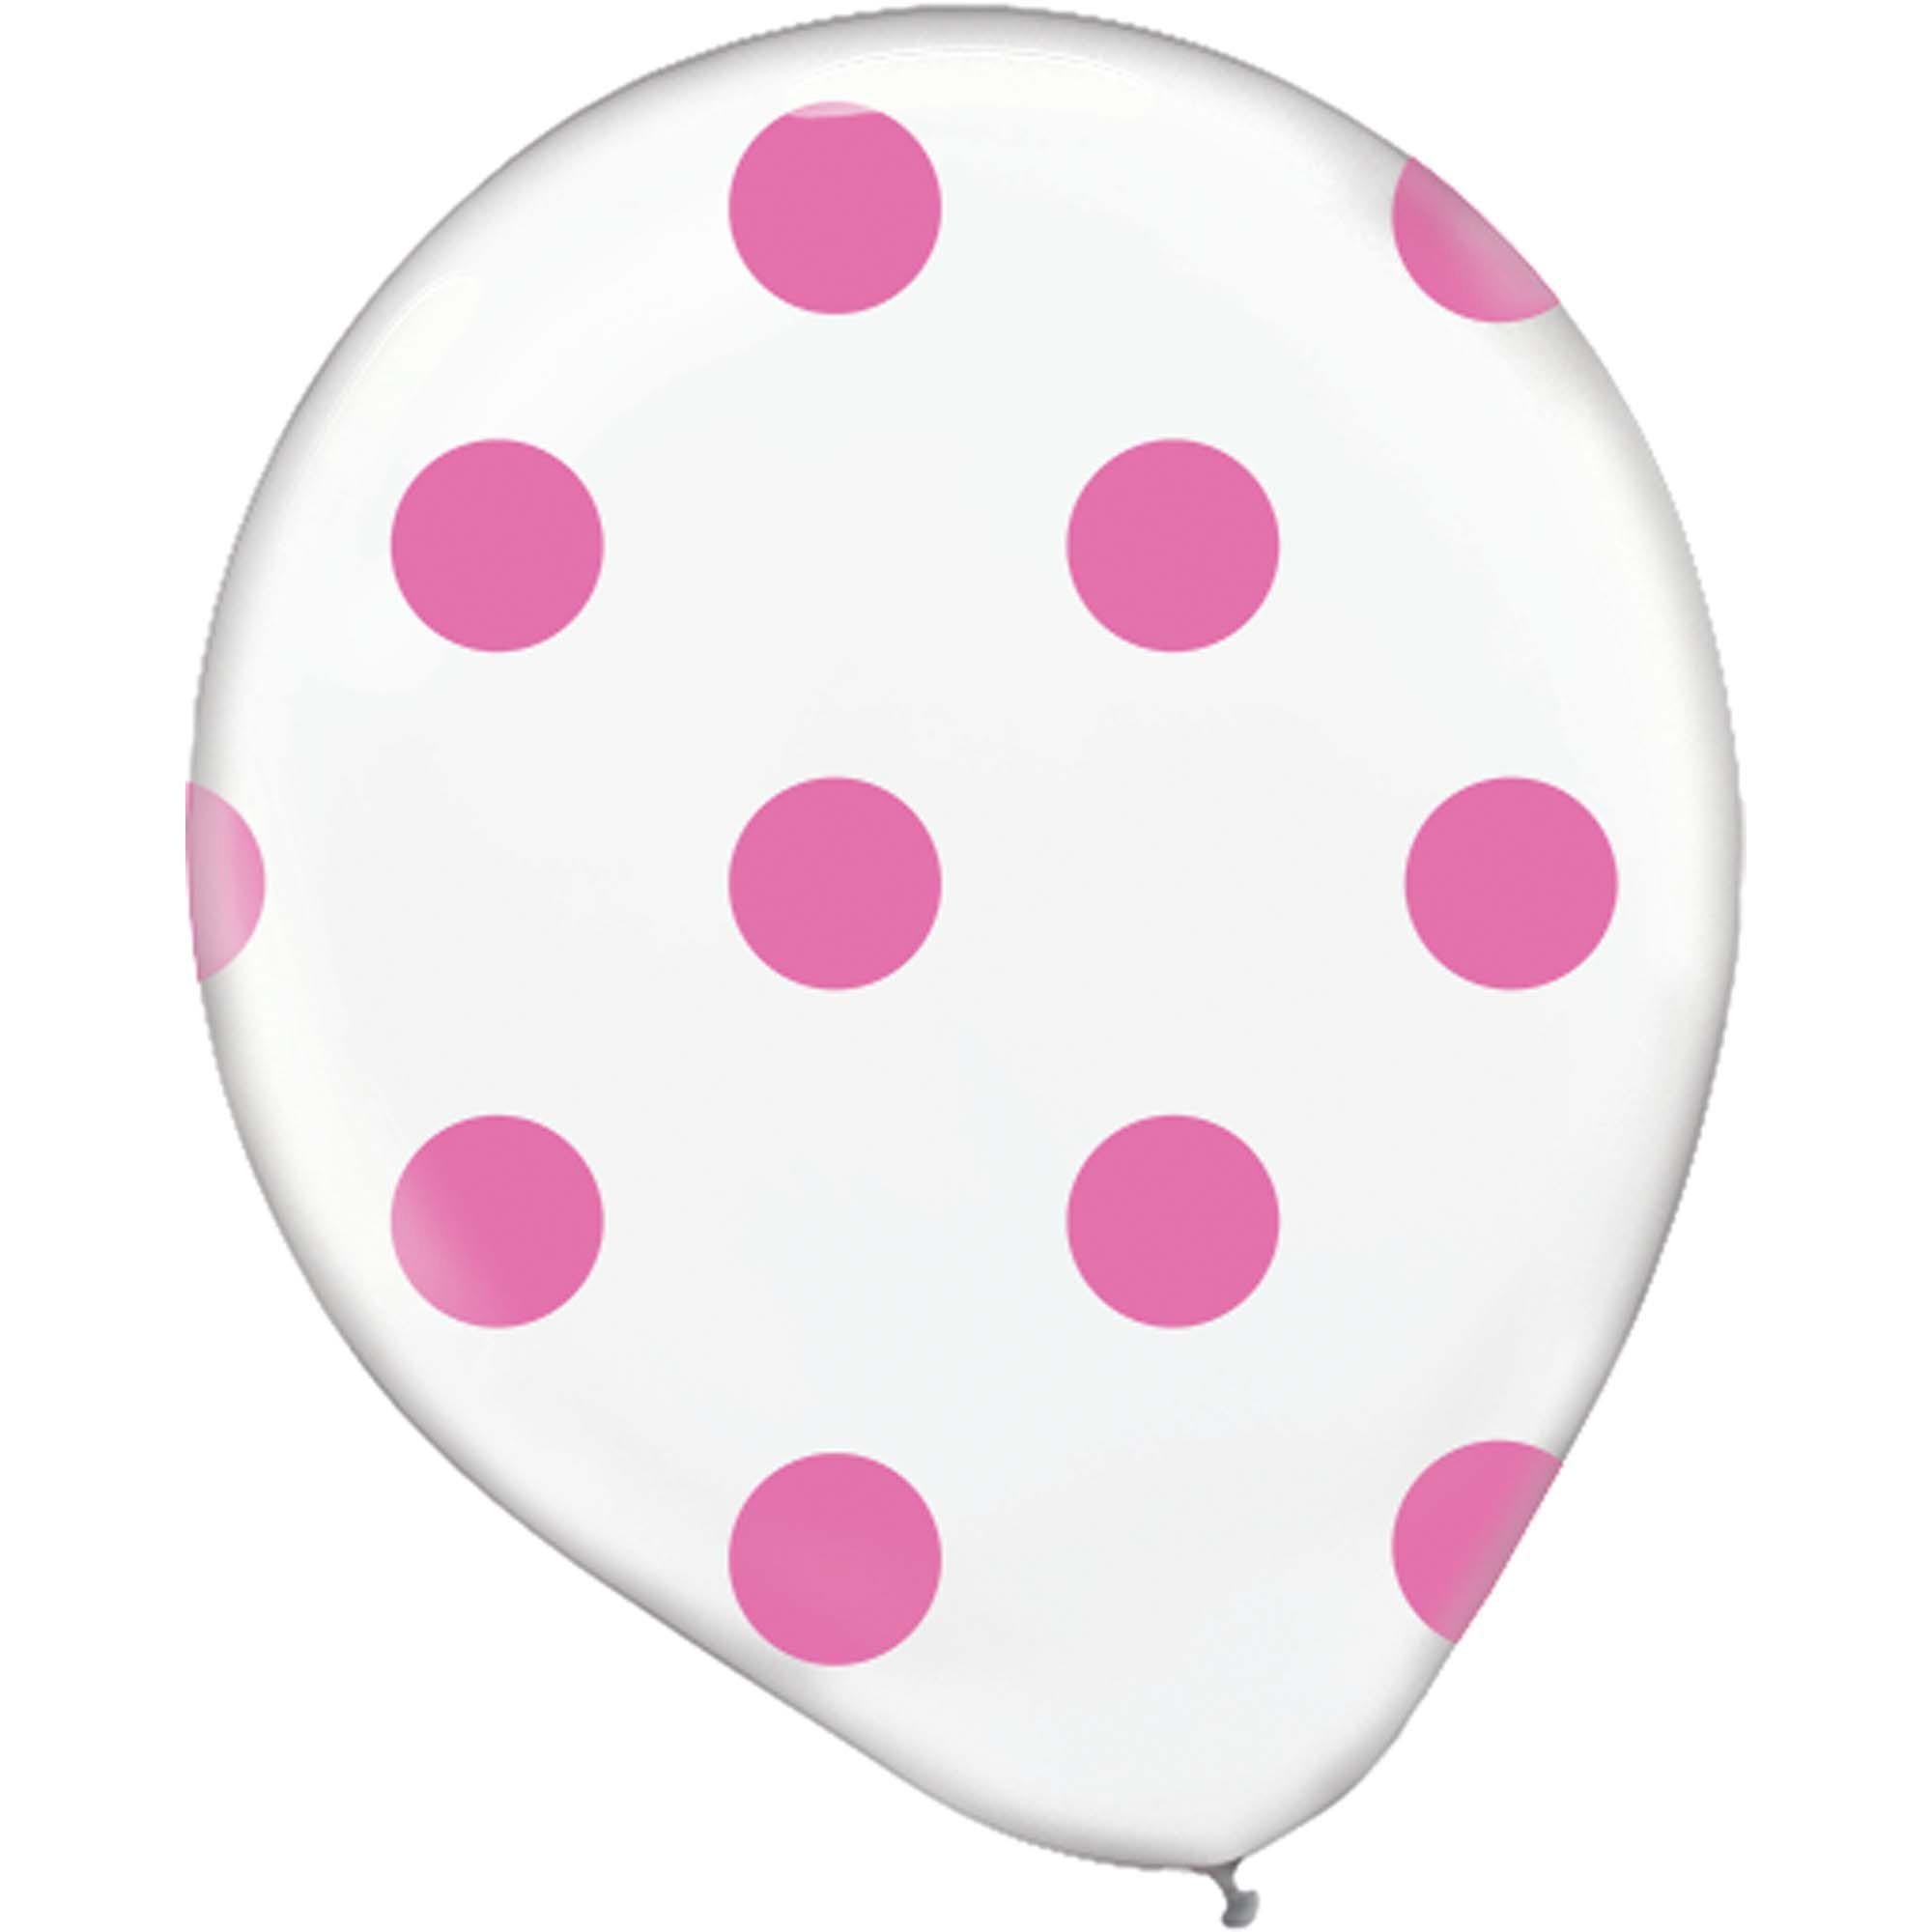 Bright Pink Polka Dot Latex Balloon 20ct Balloons & Streamers - Party Centre - Party Centre